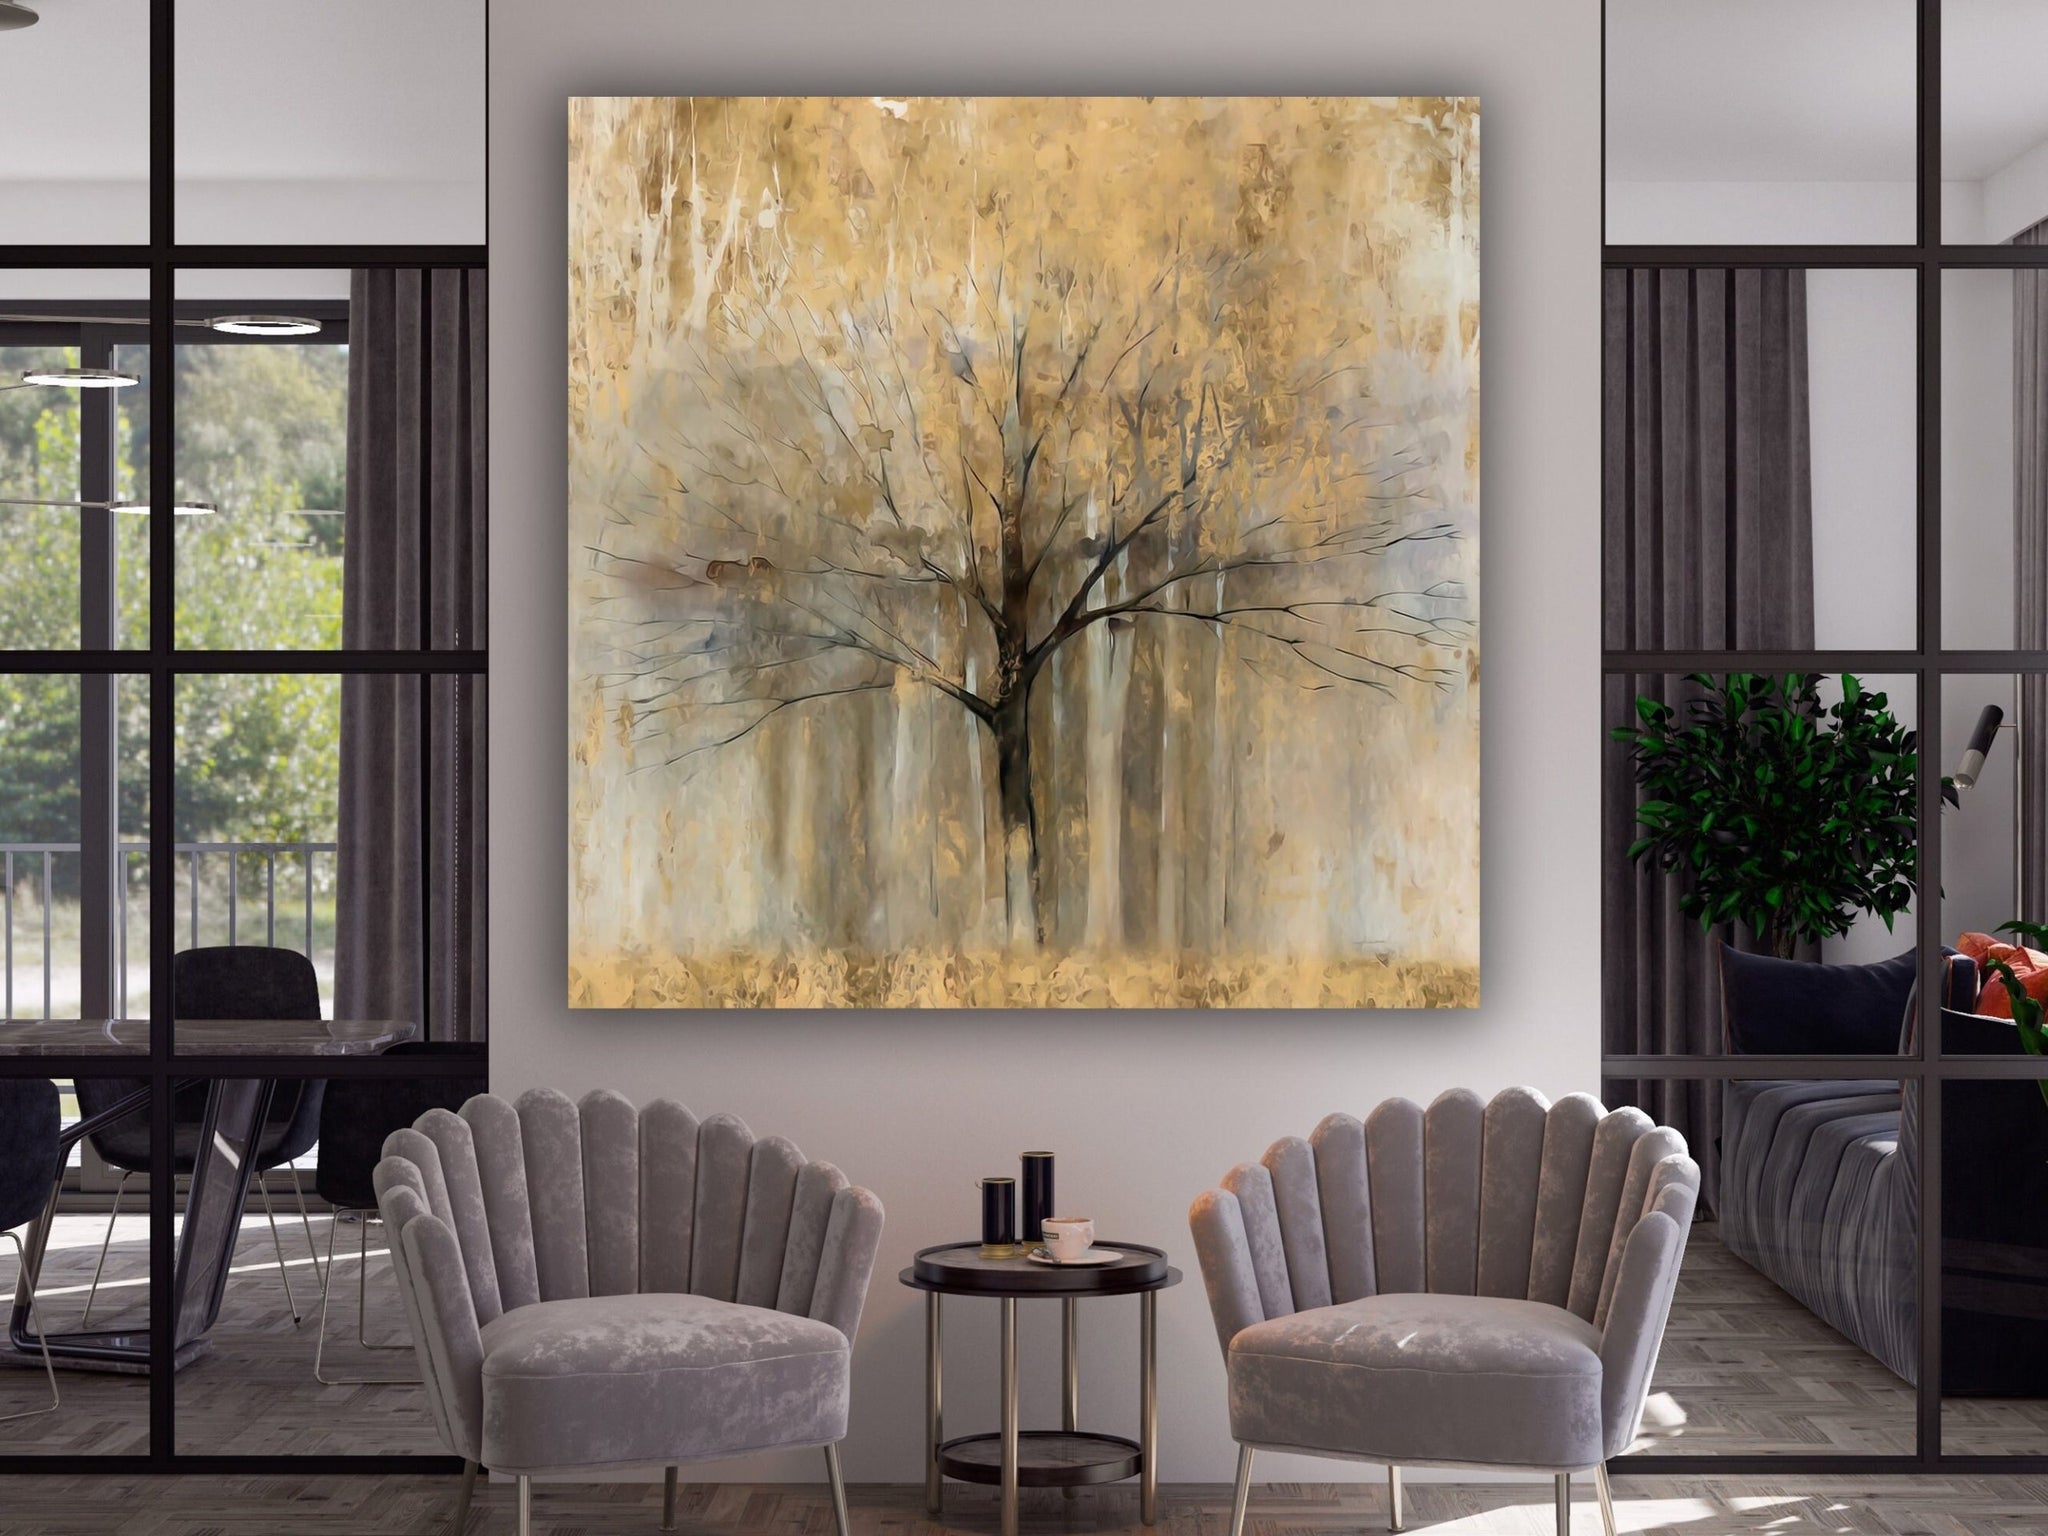 Large Gold Tree Abstract Painting,Gold  Wall Art,Expressionist   Painting Aesthetic room decor